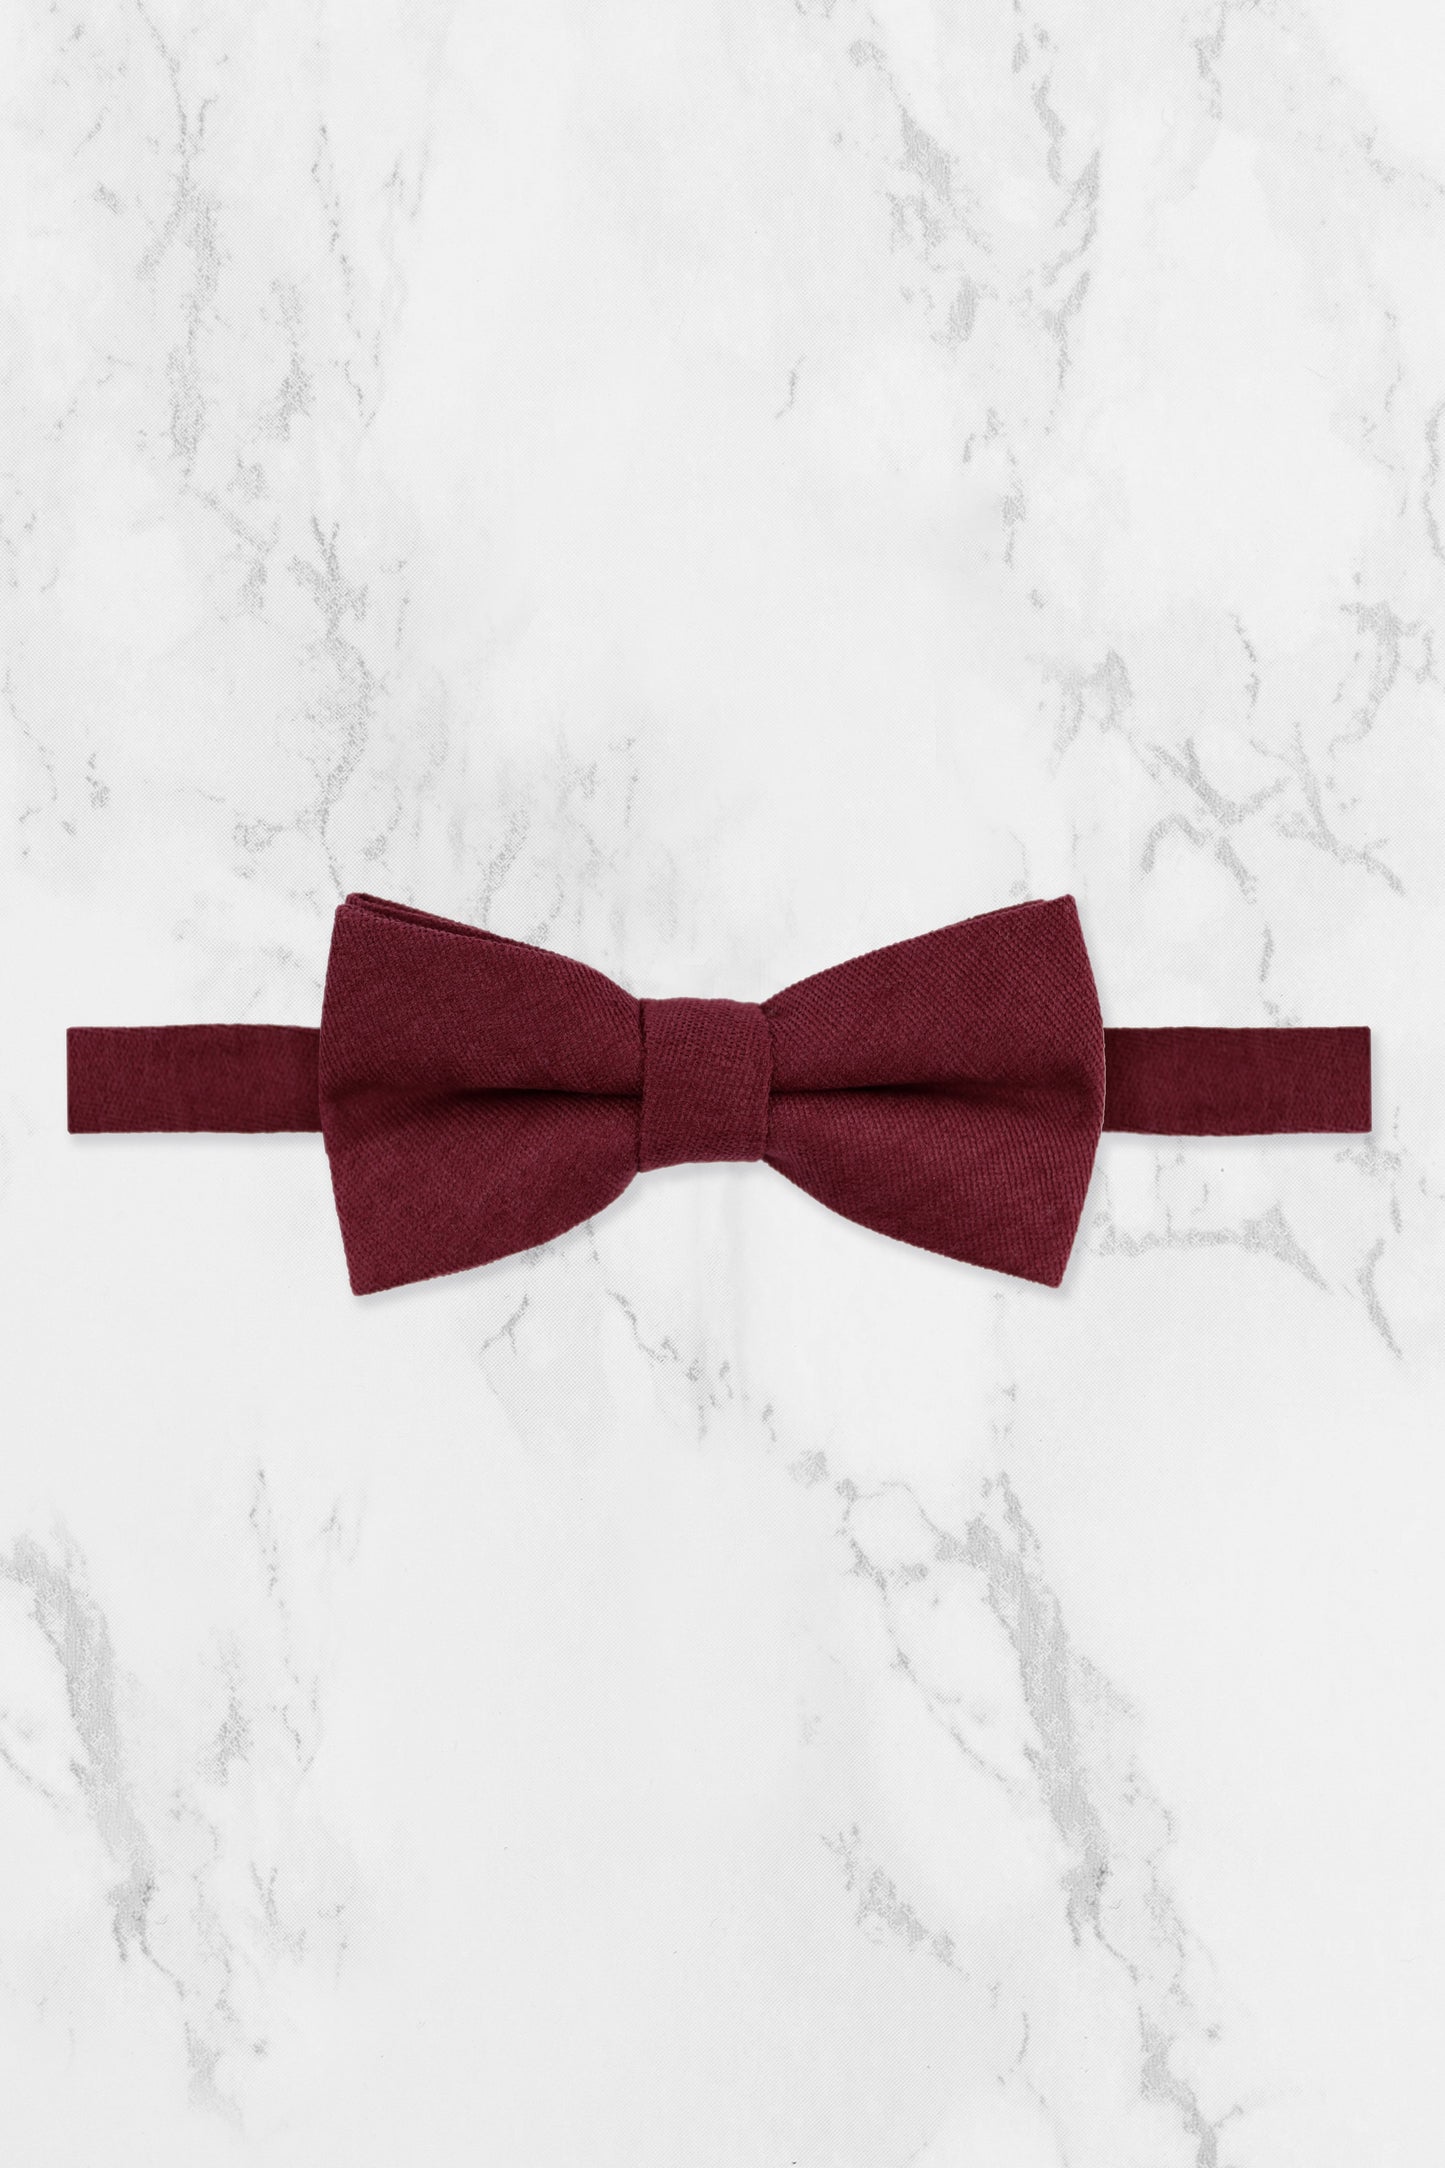 100% Brushed Cotton Suede Tie - Burgundy Red